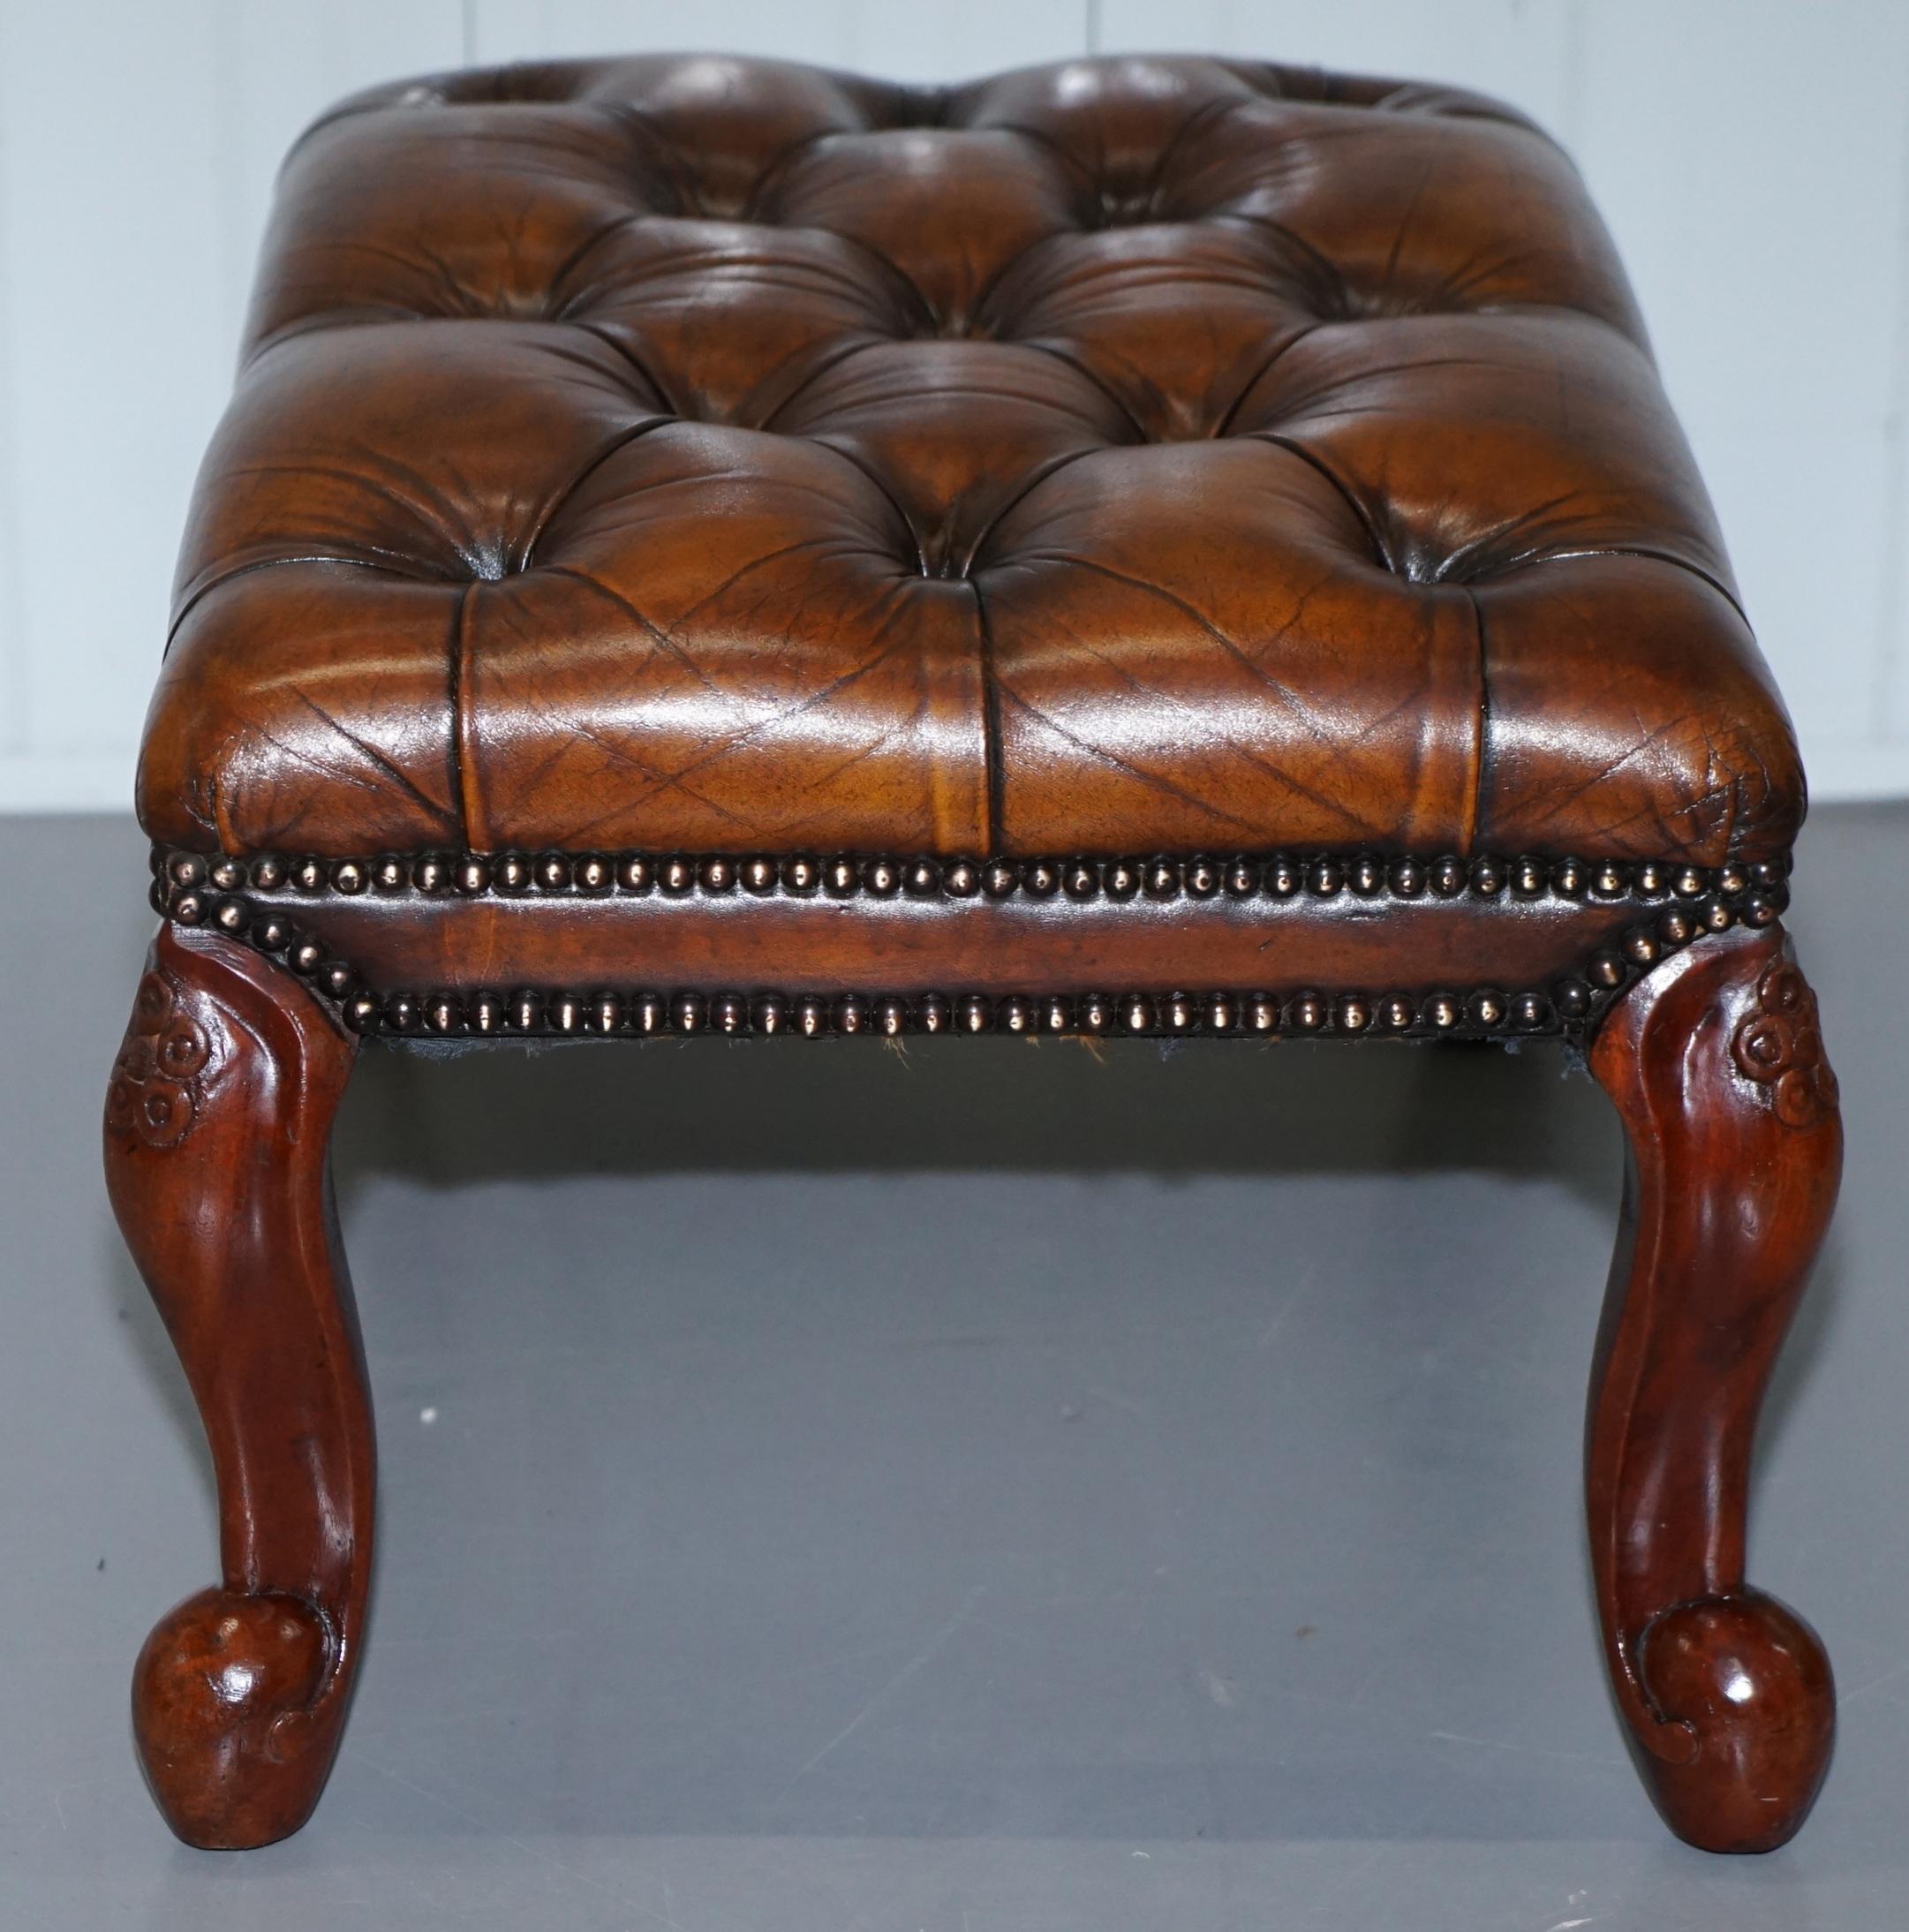 Stunning Fully Restored Hand Dyed Brown Leather Chesterfield Footstool Ornate 4